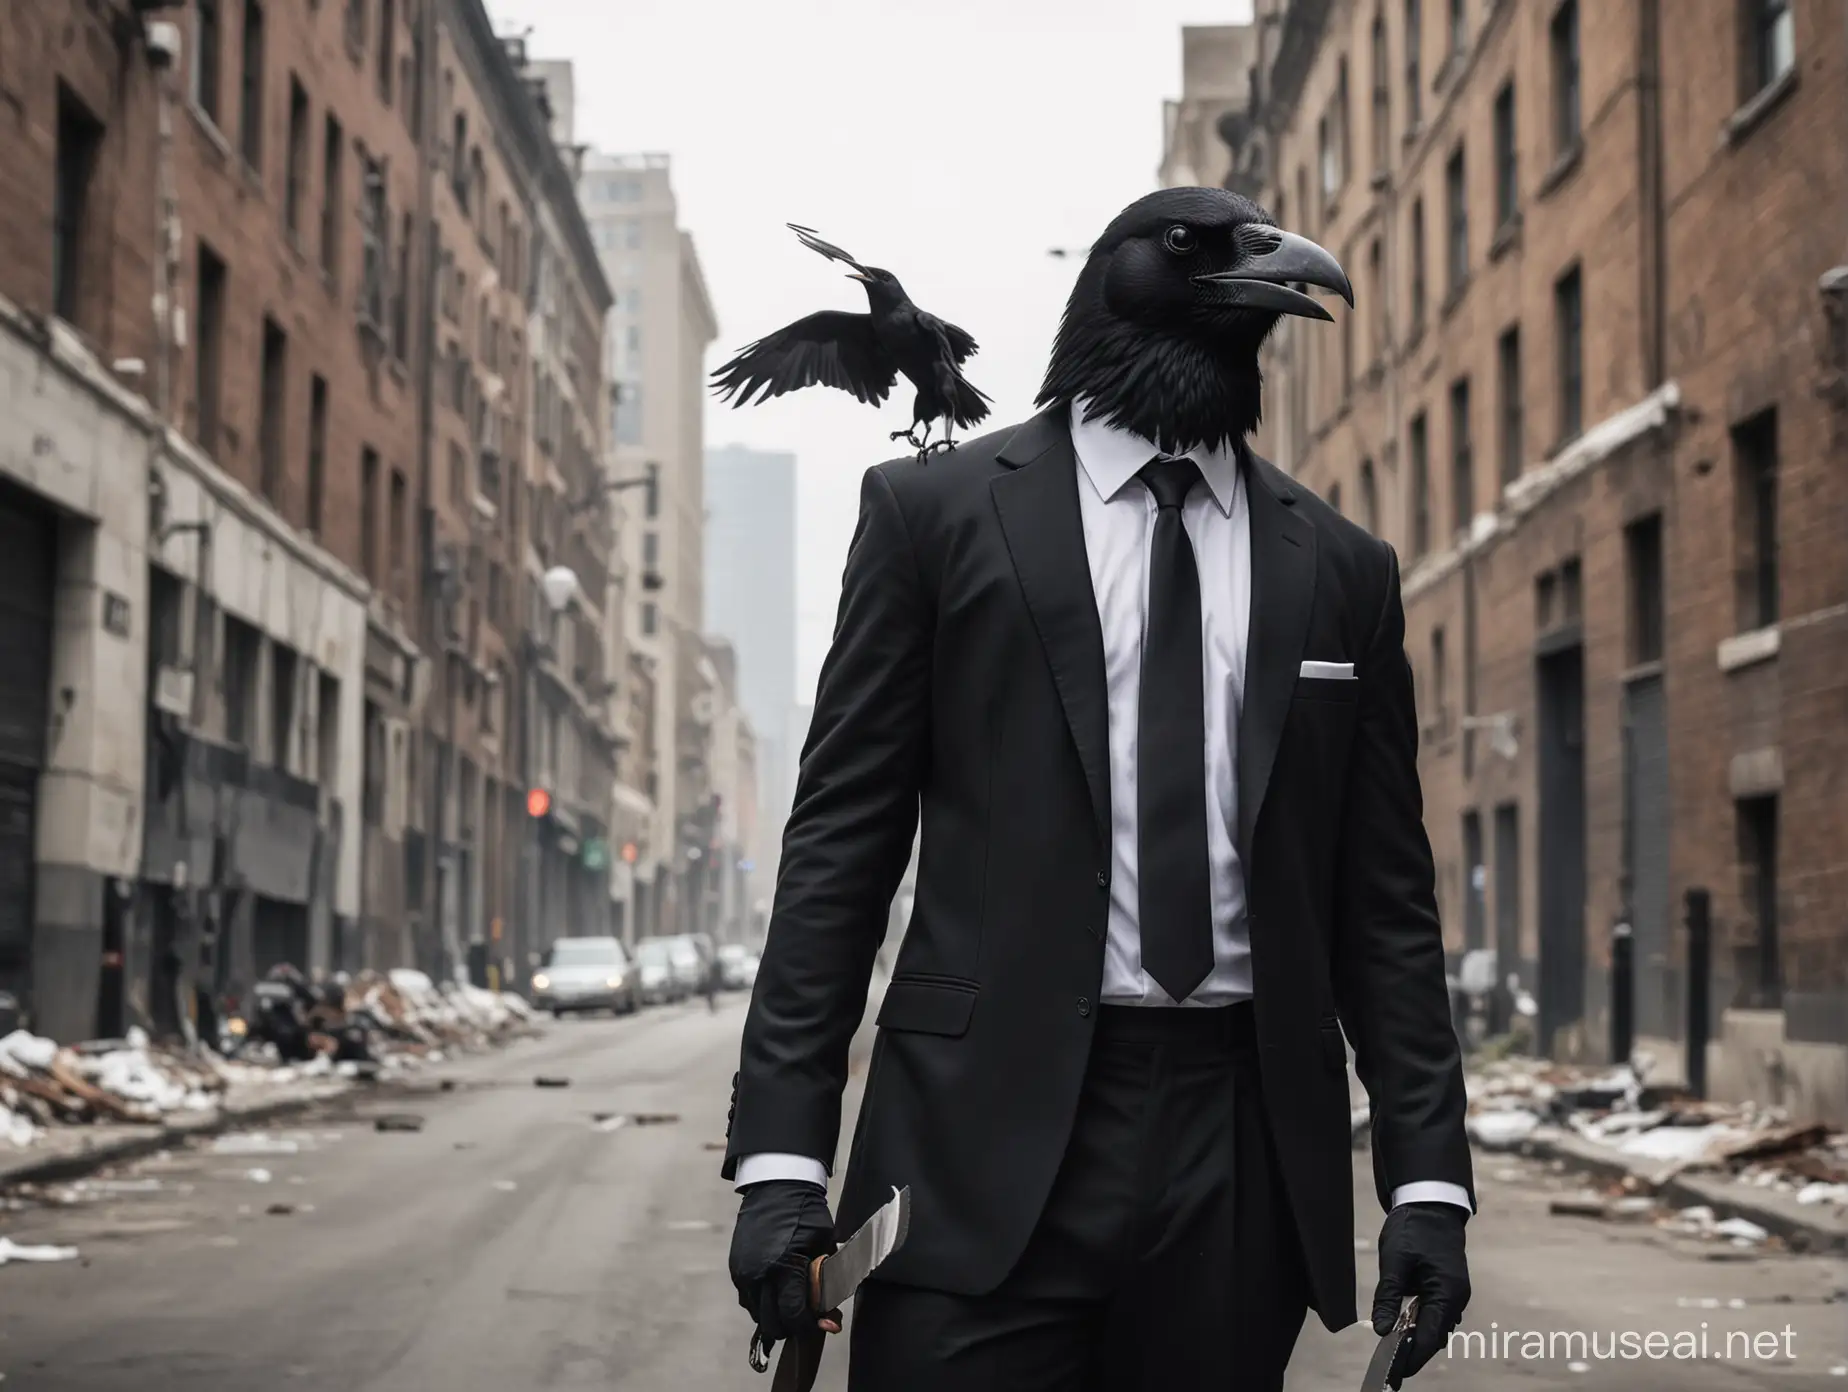 crow in a classic black suit with white shirt and black tie holding a knife in its beak standing in urban area